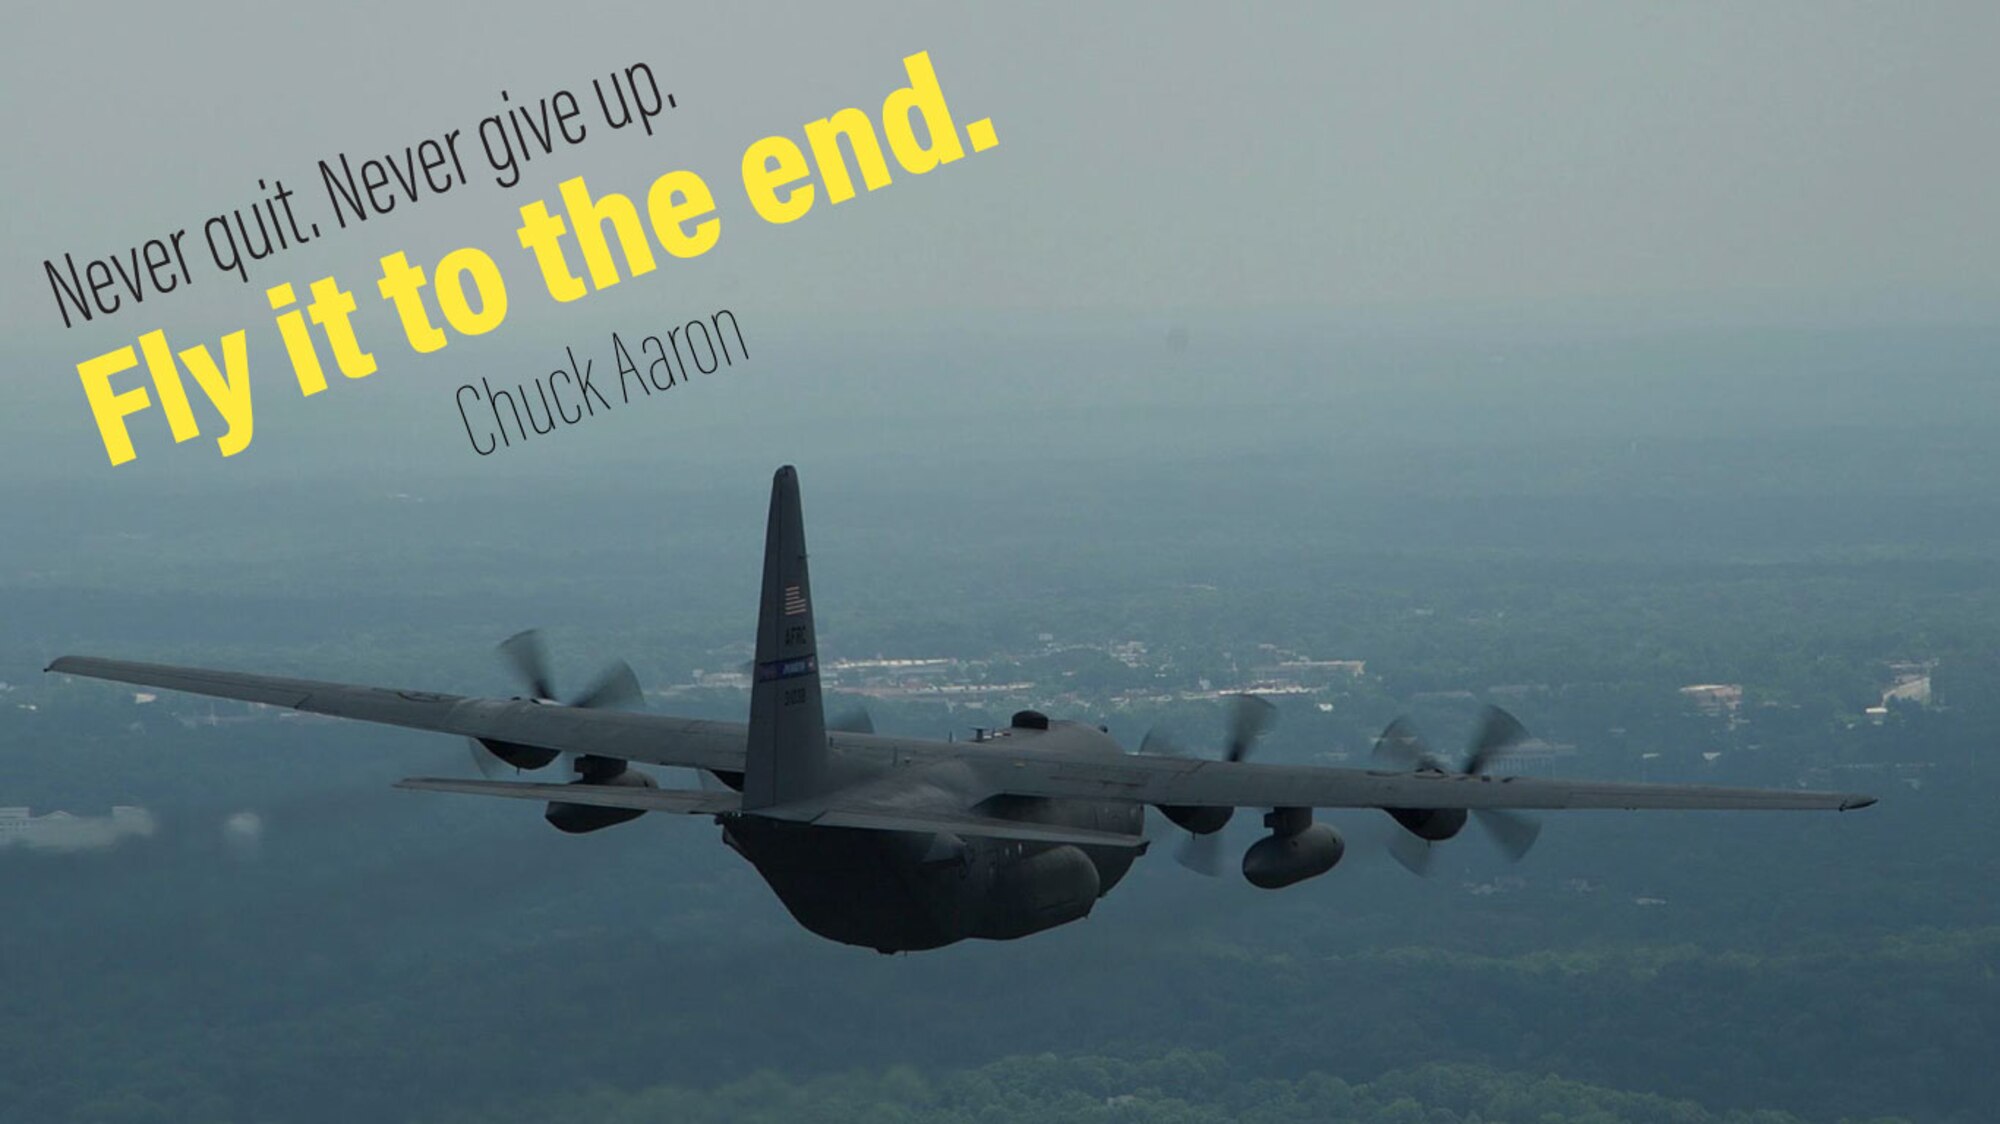 This week's Monday Motivation is from Chuck Aaron:

"Never quit. Never give up. Fly it to the end." 

(U.S. Air Force graphic/Staff Sgt. Andrew Park)